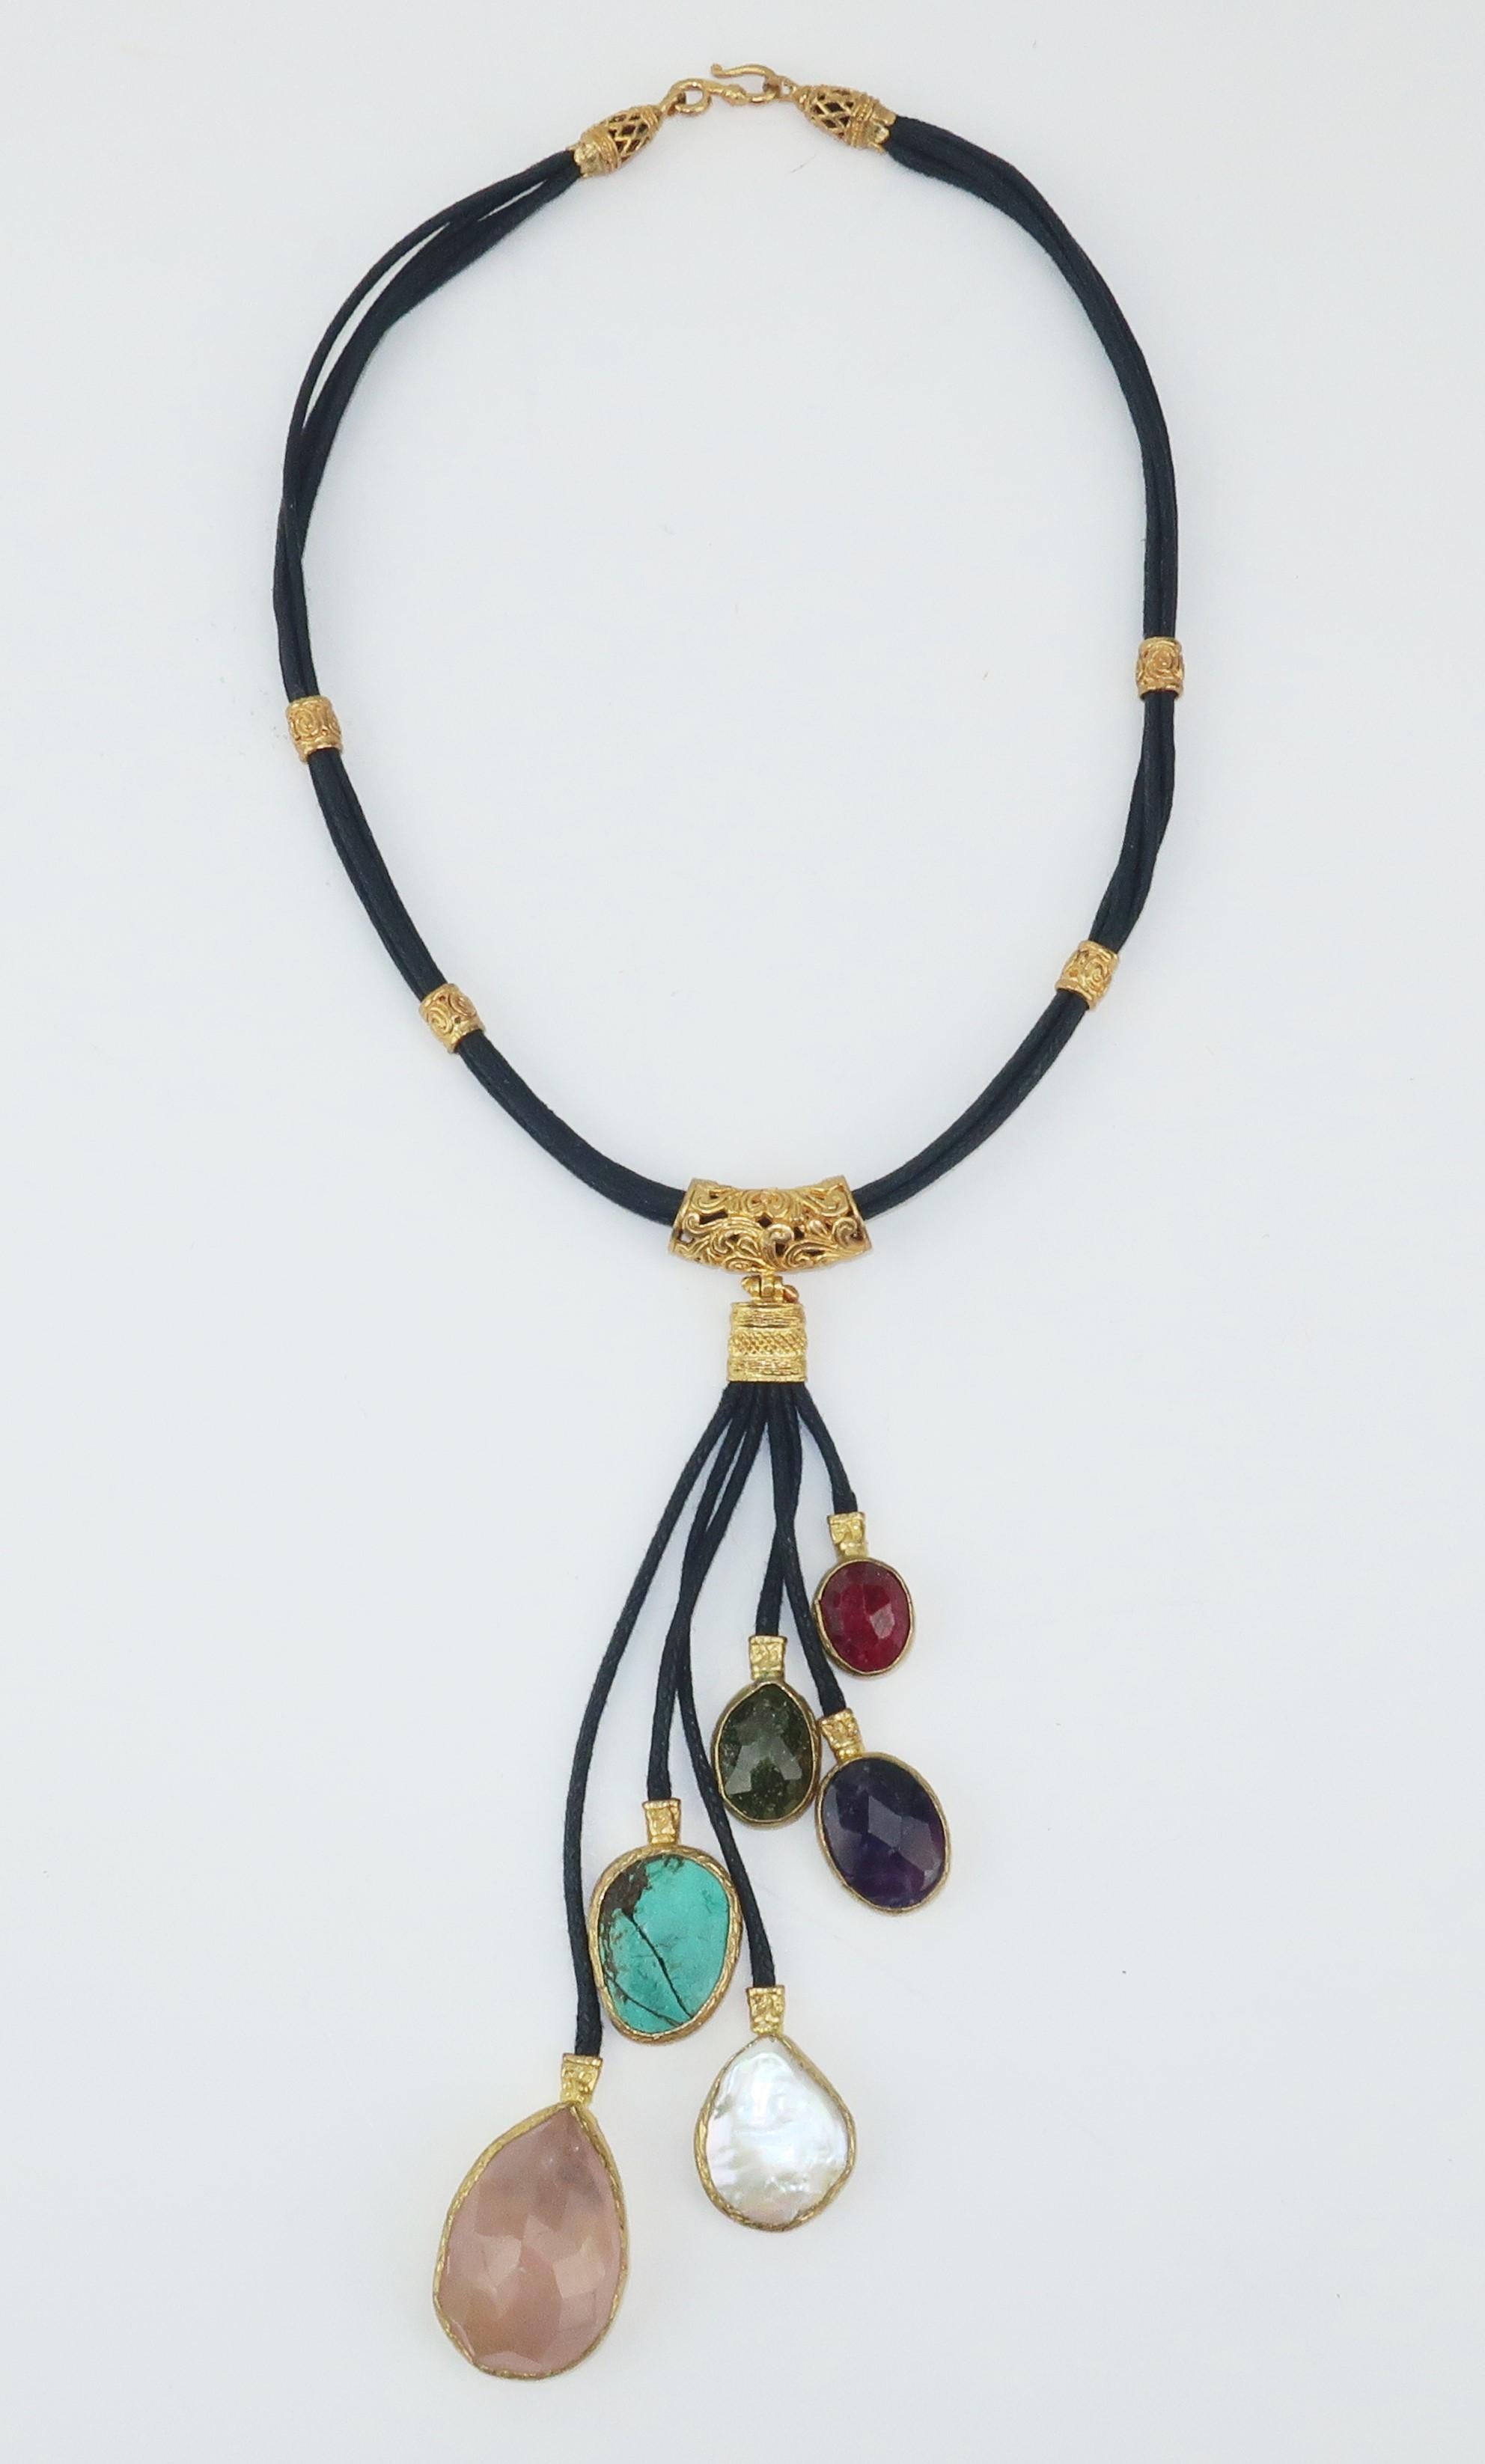 An exotic necklace in braided leather cords laced with filigree sterling fittings with a gold wash all suspending semi precious drops at staggered lengths including rose quartz, mother-of-pearl, turquoise, amethyst and garnet.  Easy byzantine style